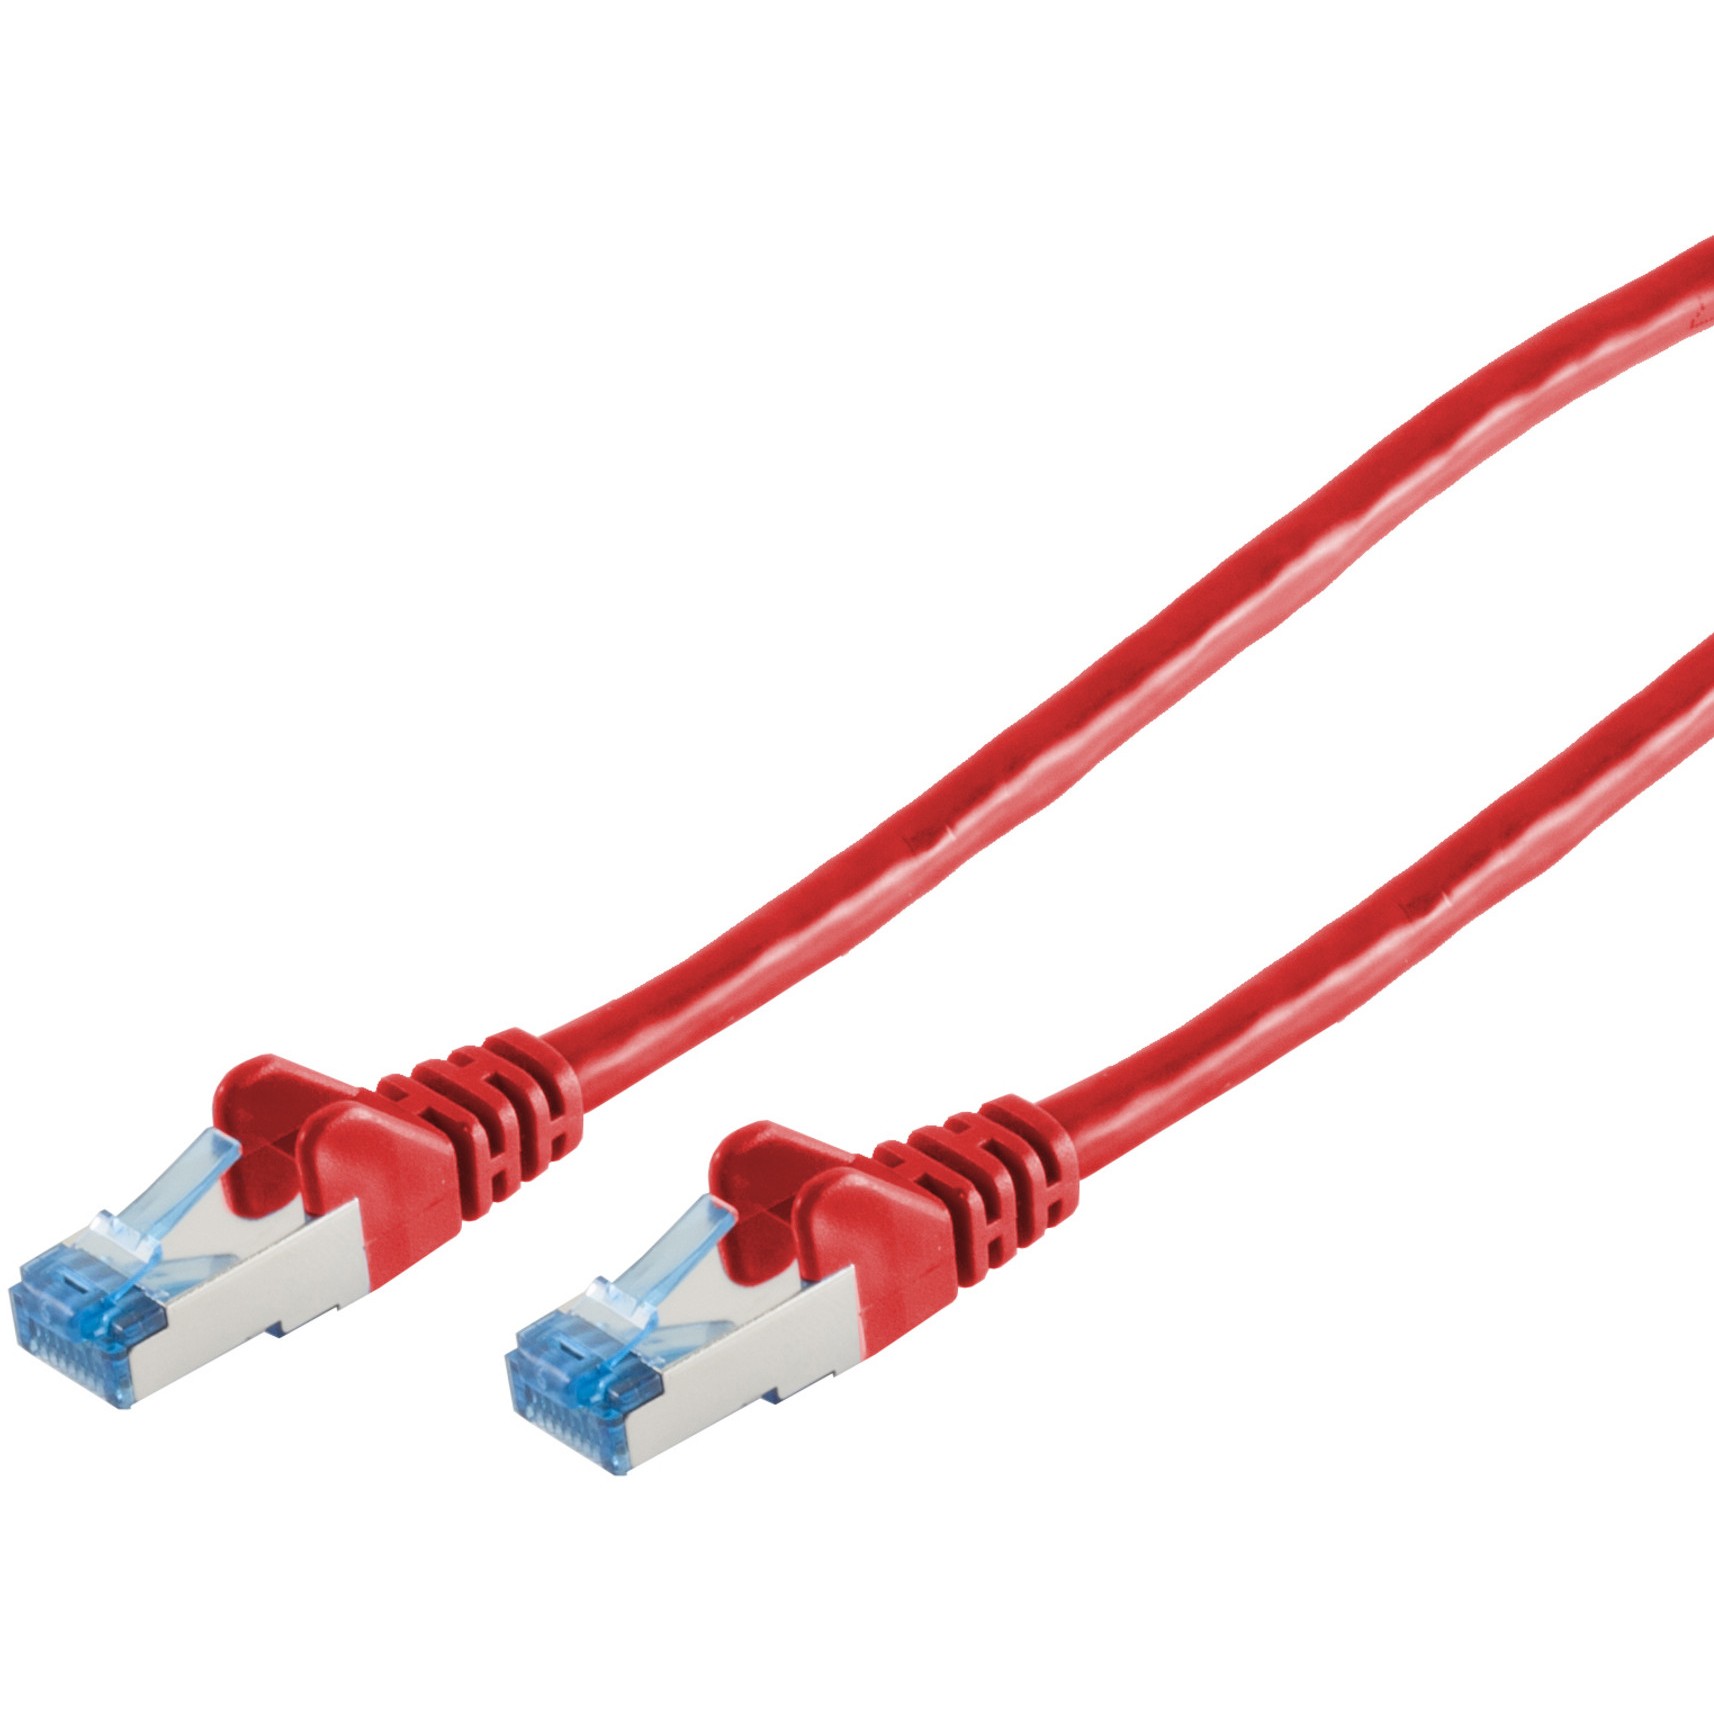 S-Conn 75711-R networking cable - 75711-R